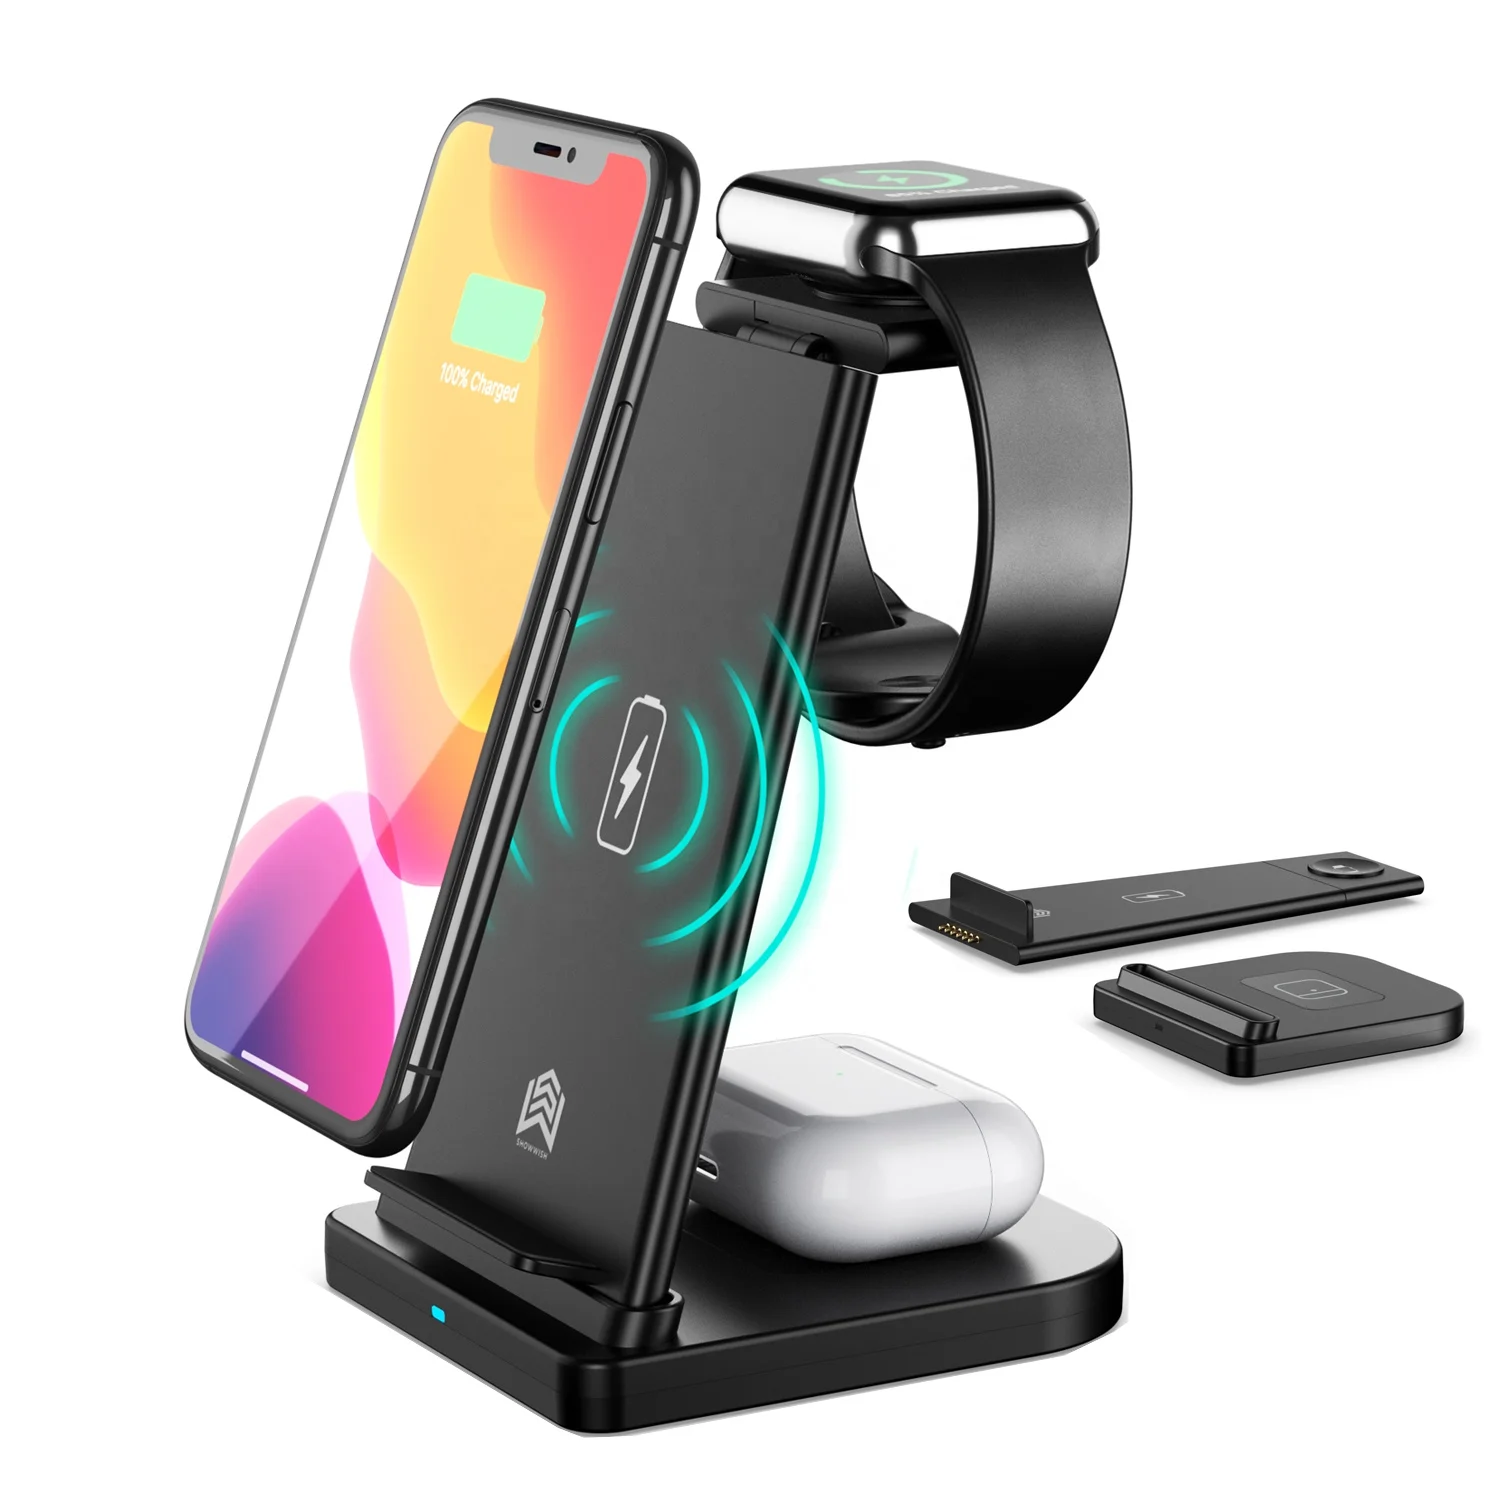 

Alibaba Most Sold Product Seller 2021/2022 Amazon Best Sellers 3 In 1 Wireless Charger Stand, Black white